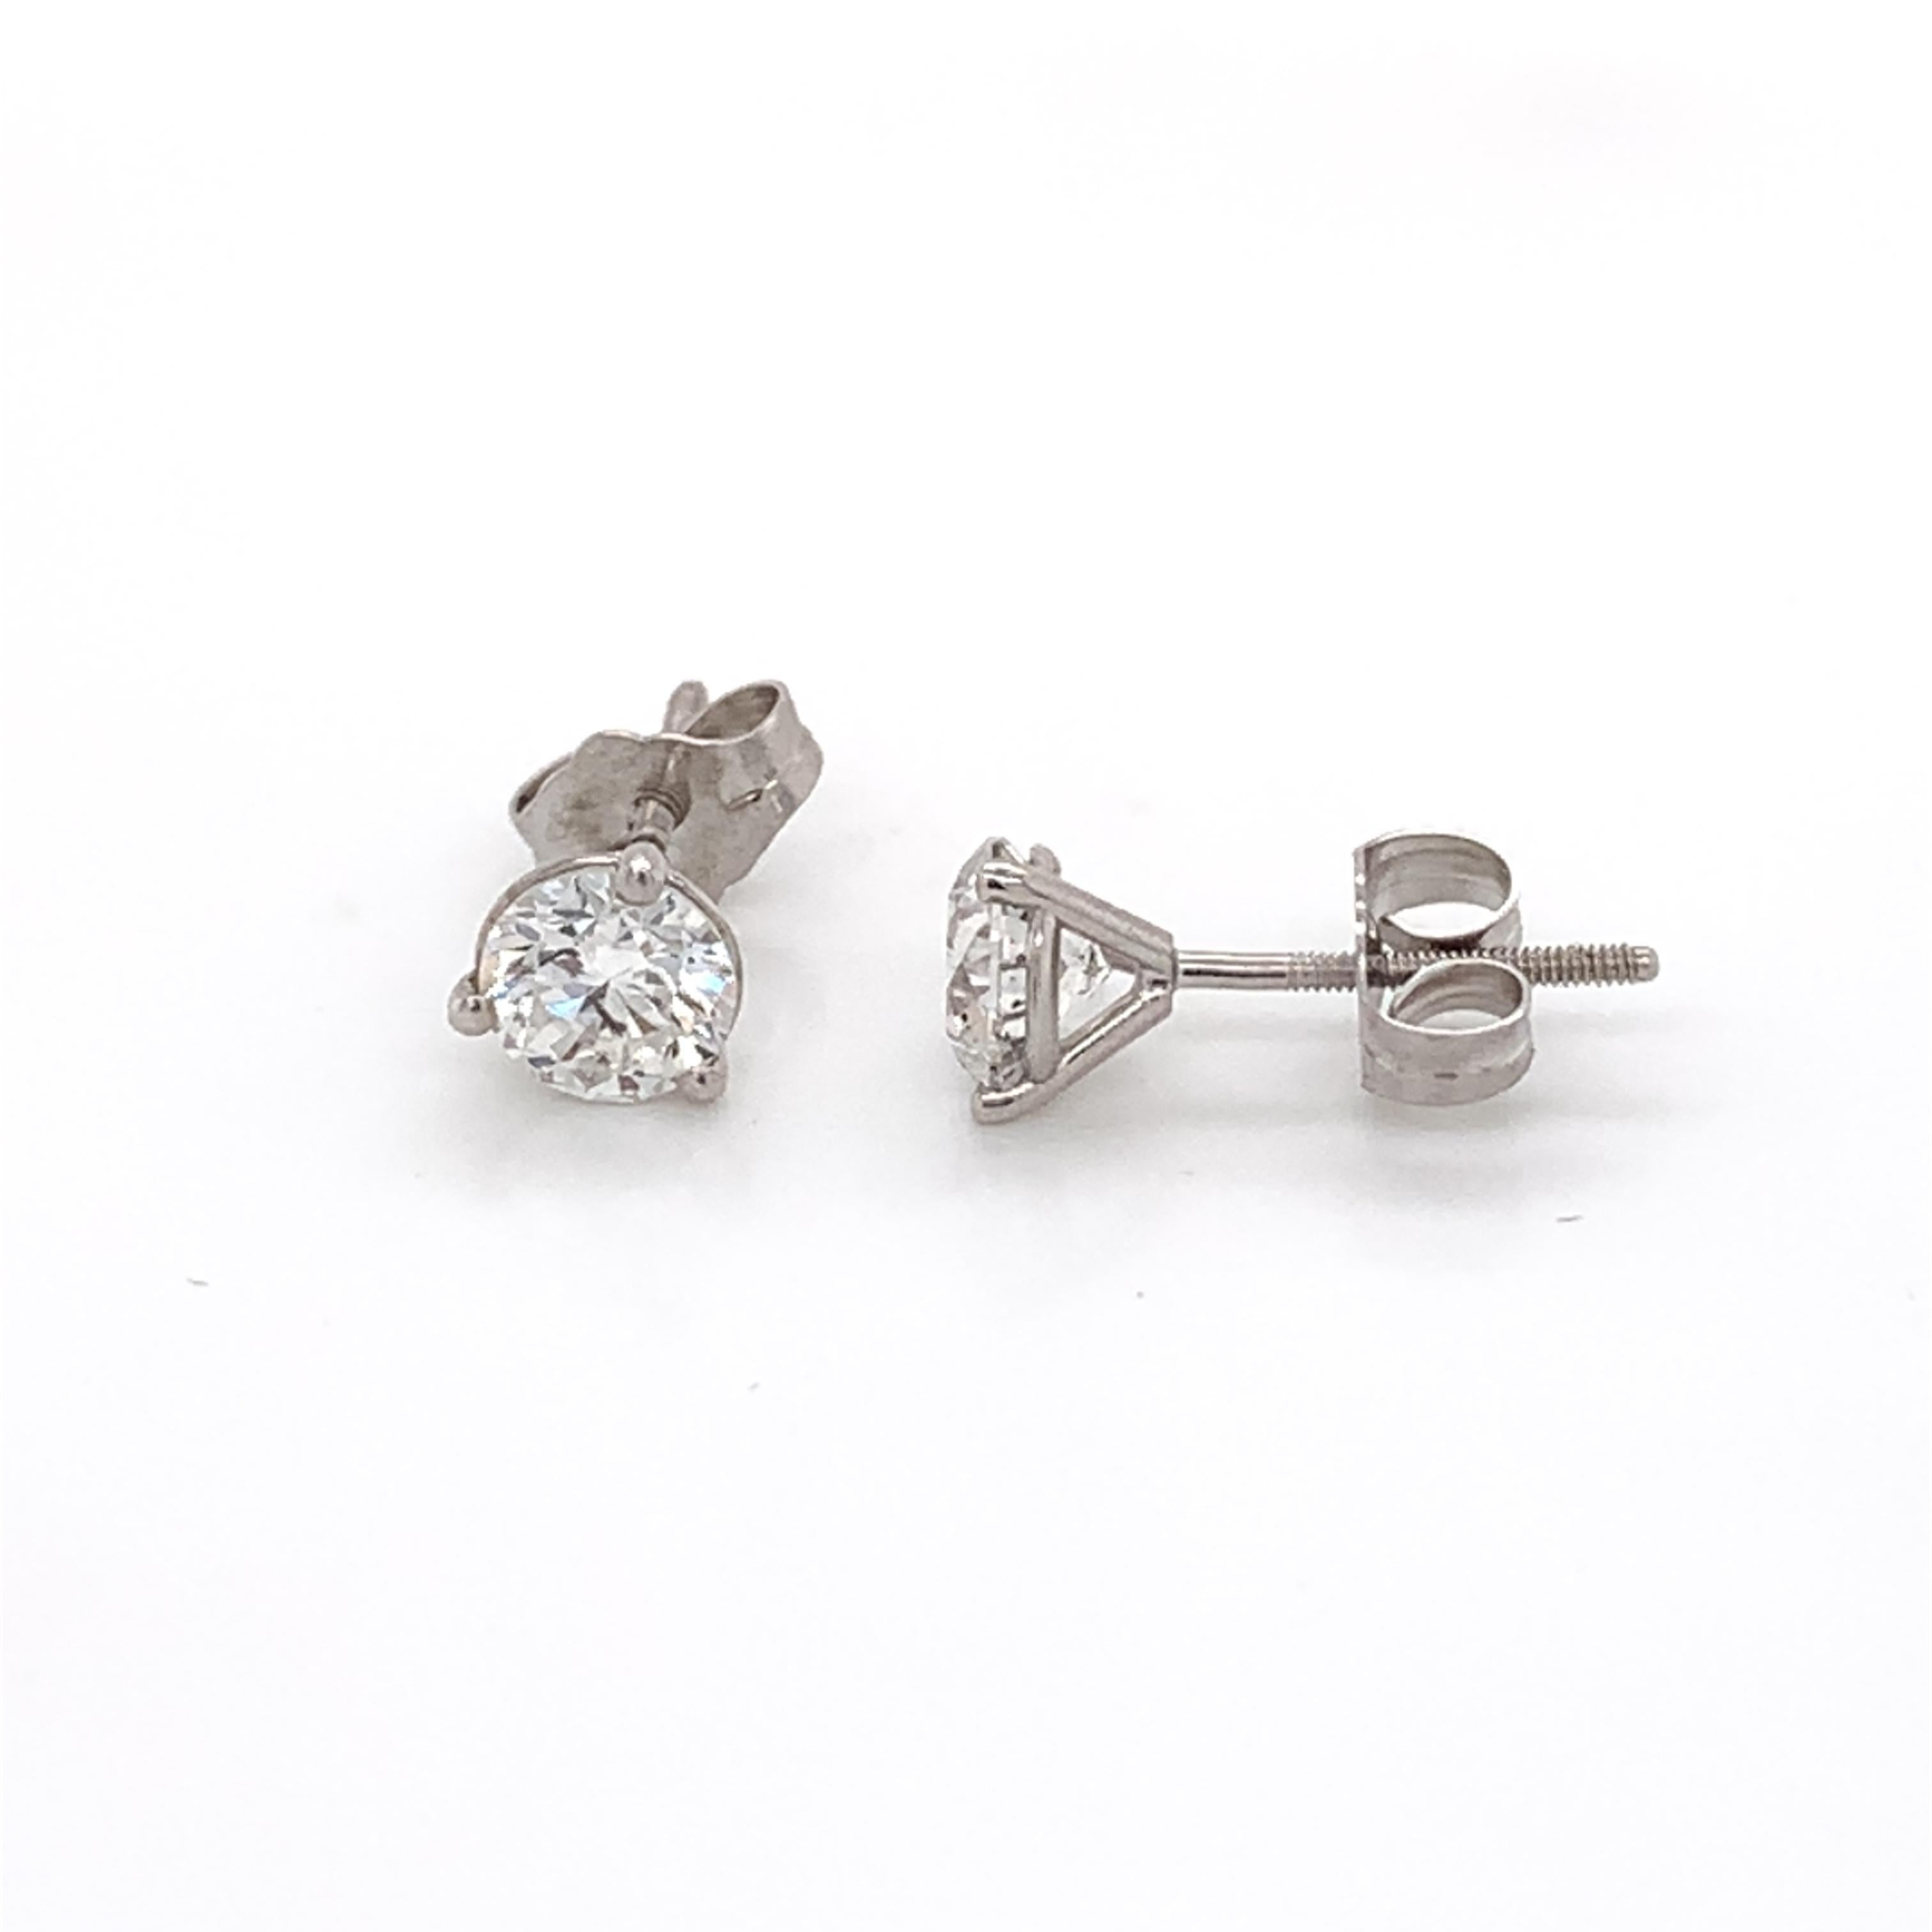 Medium sized diamond stud earrings perfect for everyday. Made with real/natural brilliant cut diamonds. Total Diamond Weight: 1.05 carats. Diamond Quantity: 2 round diamonds. Mounted on 18 karat white gold screw back setting.